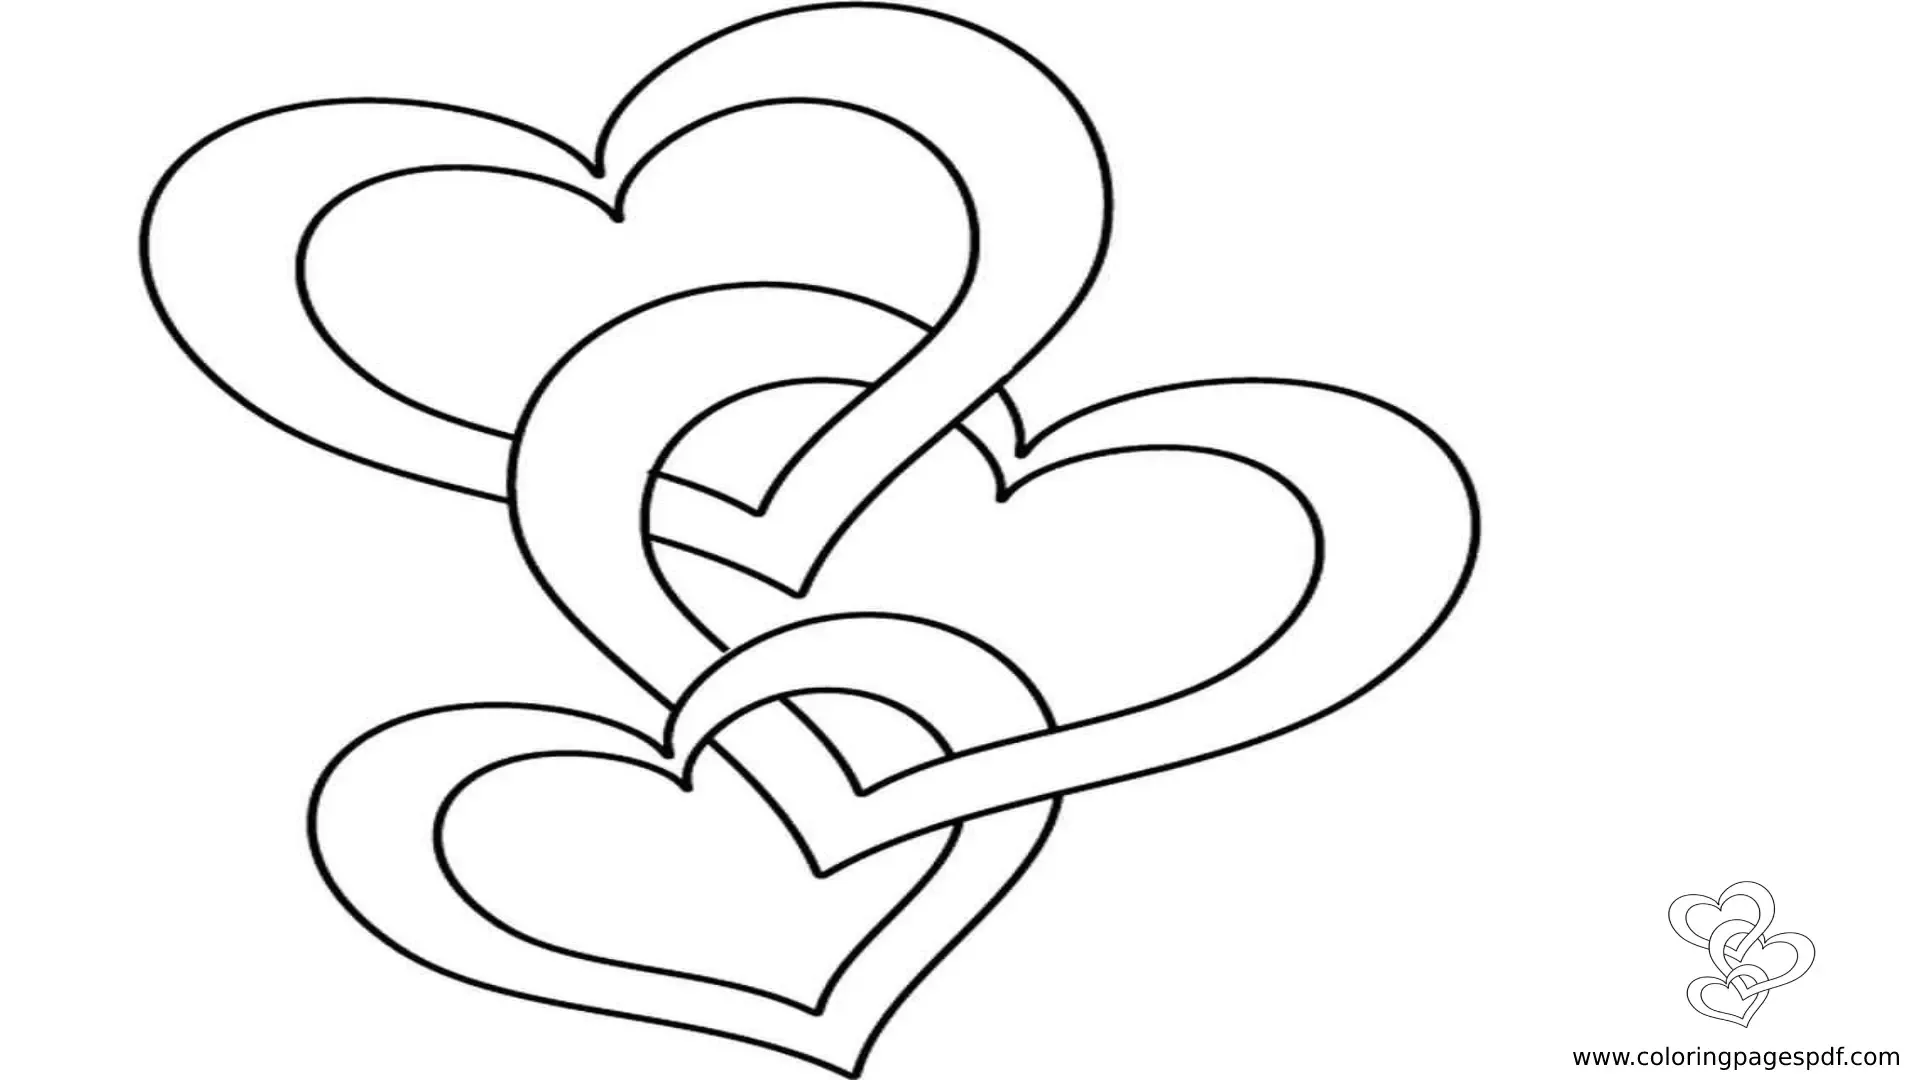 Coloring Pages Of A Heart Chain